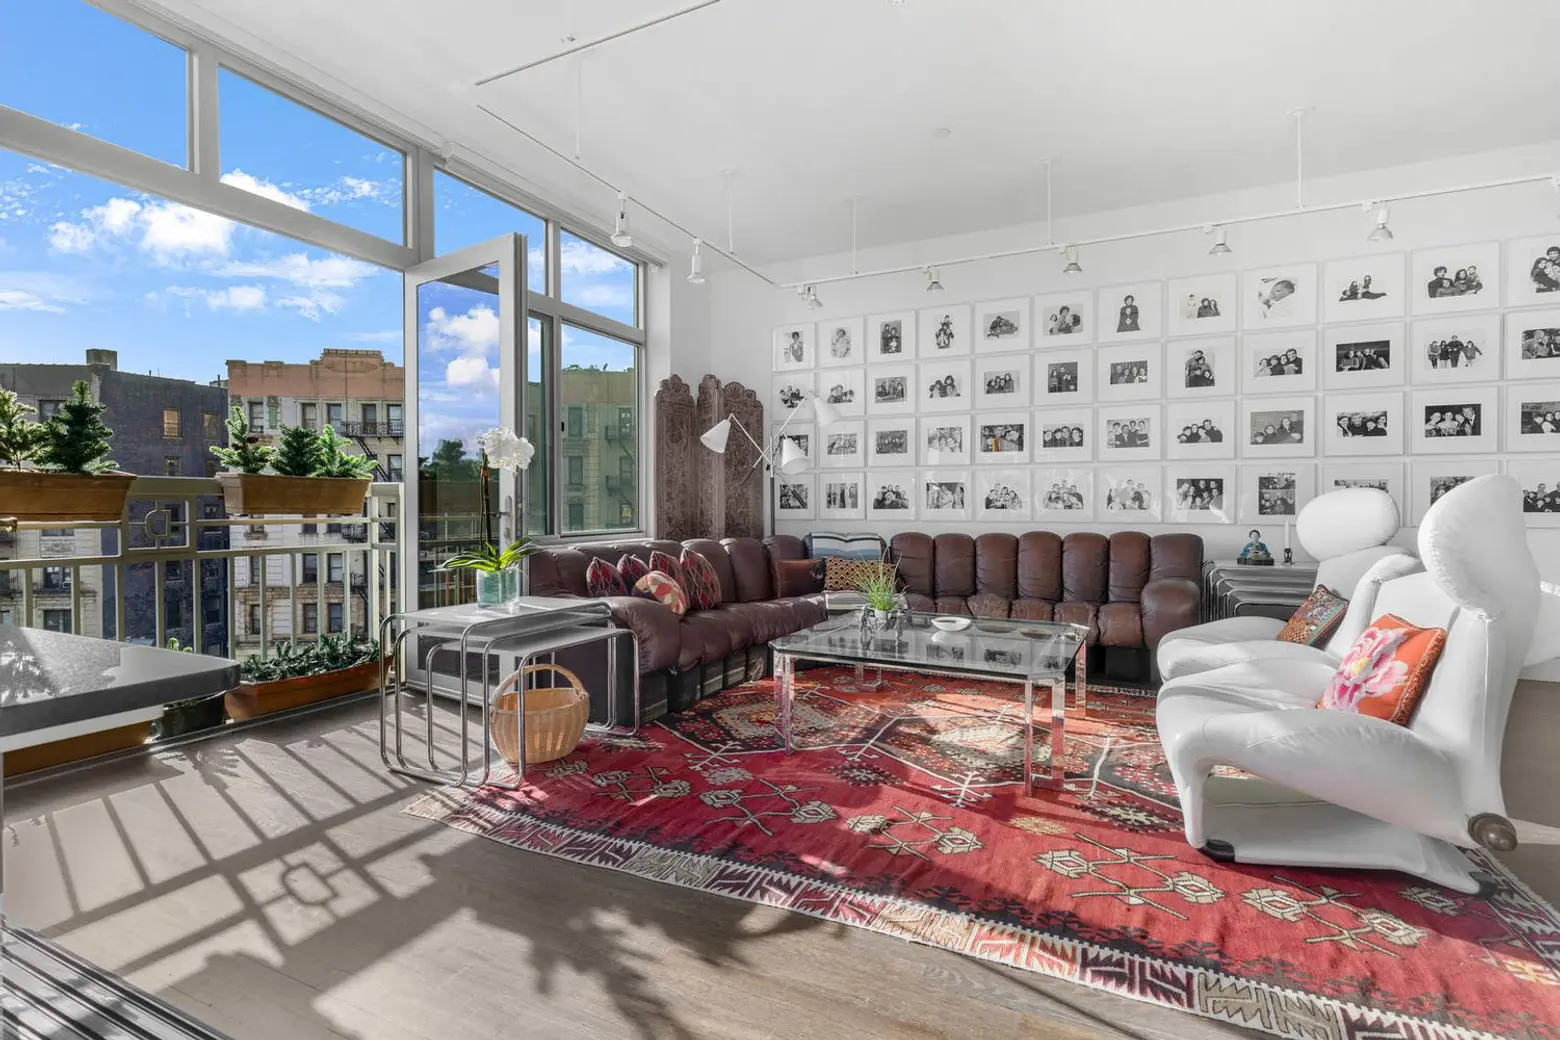 In this chic $1.4M Harlem condo, architectural built-ins invite light and banish clutter